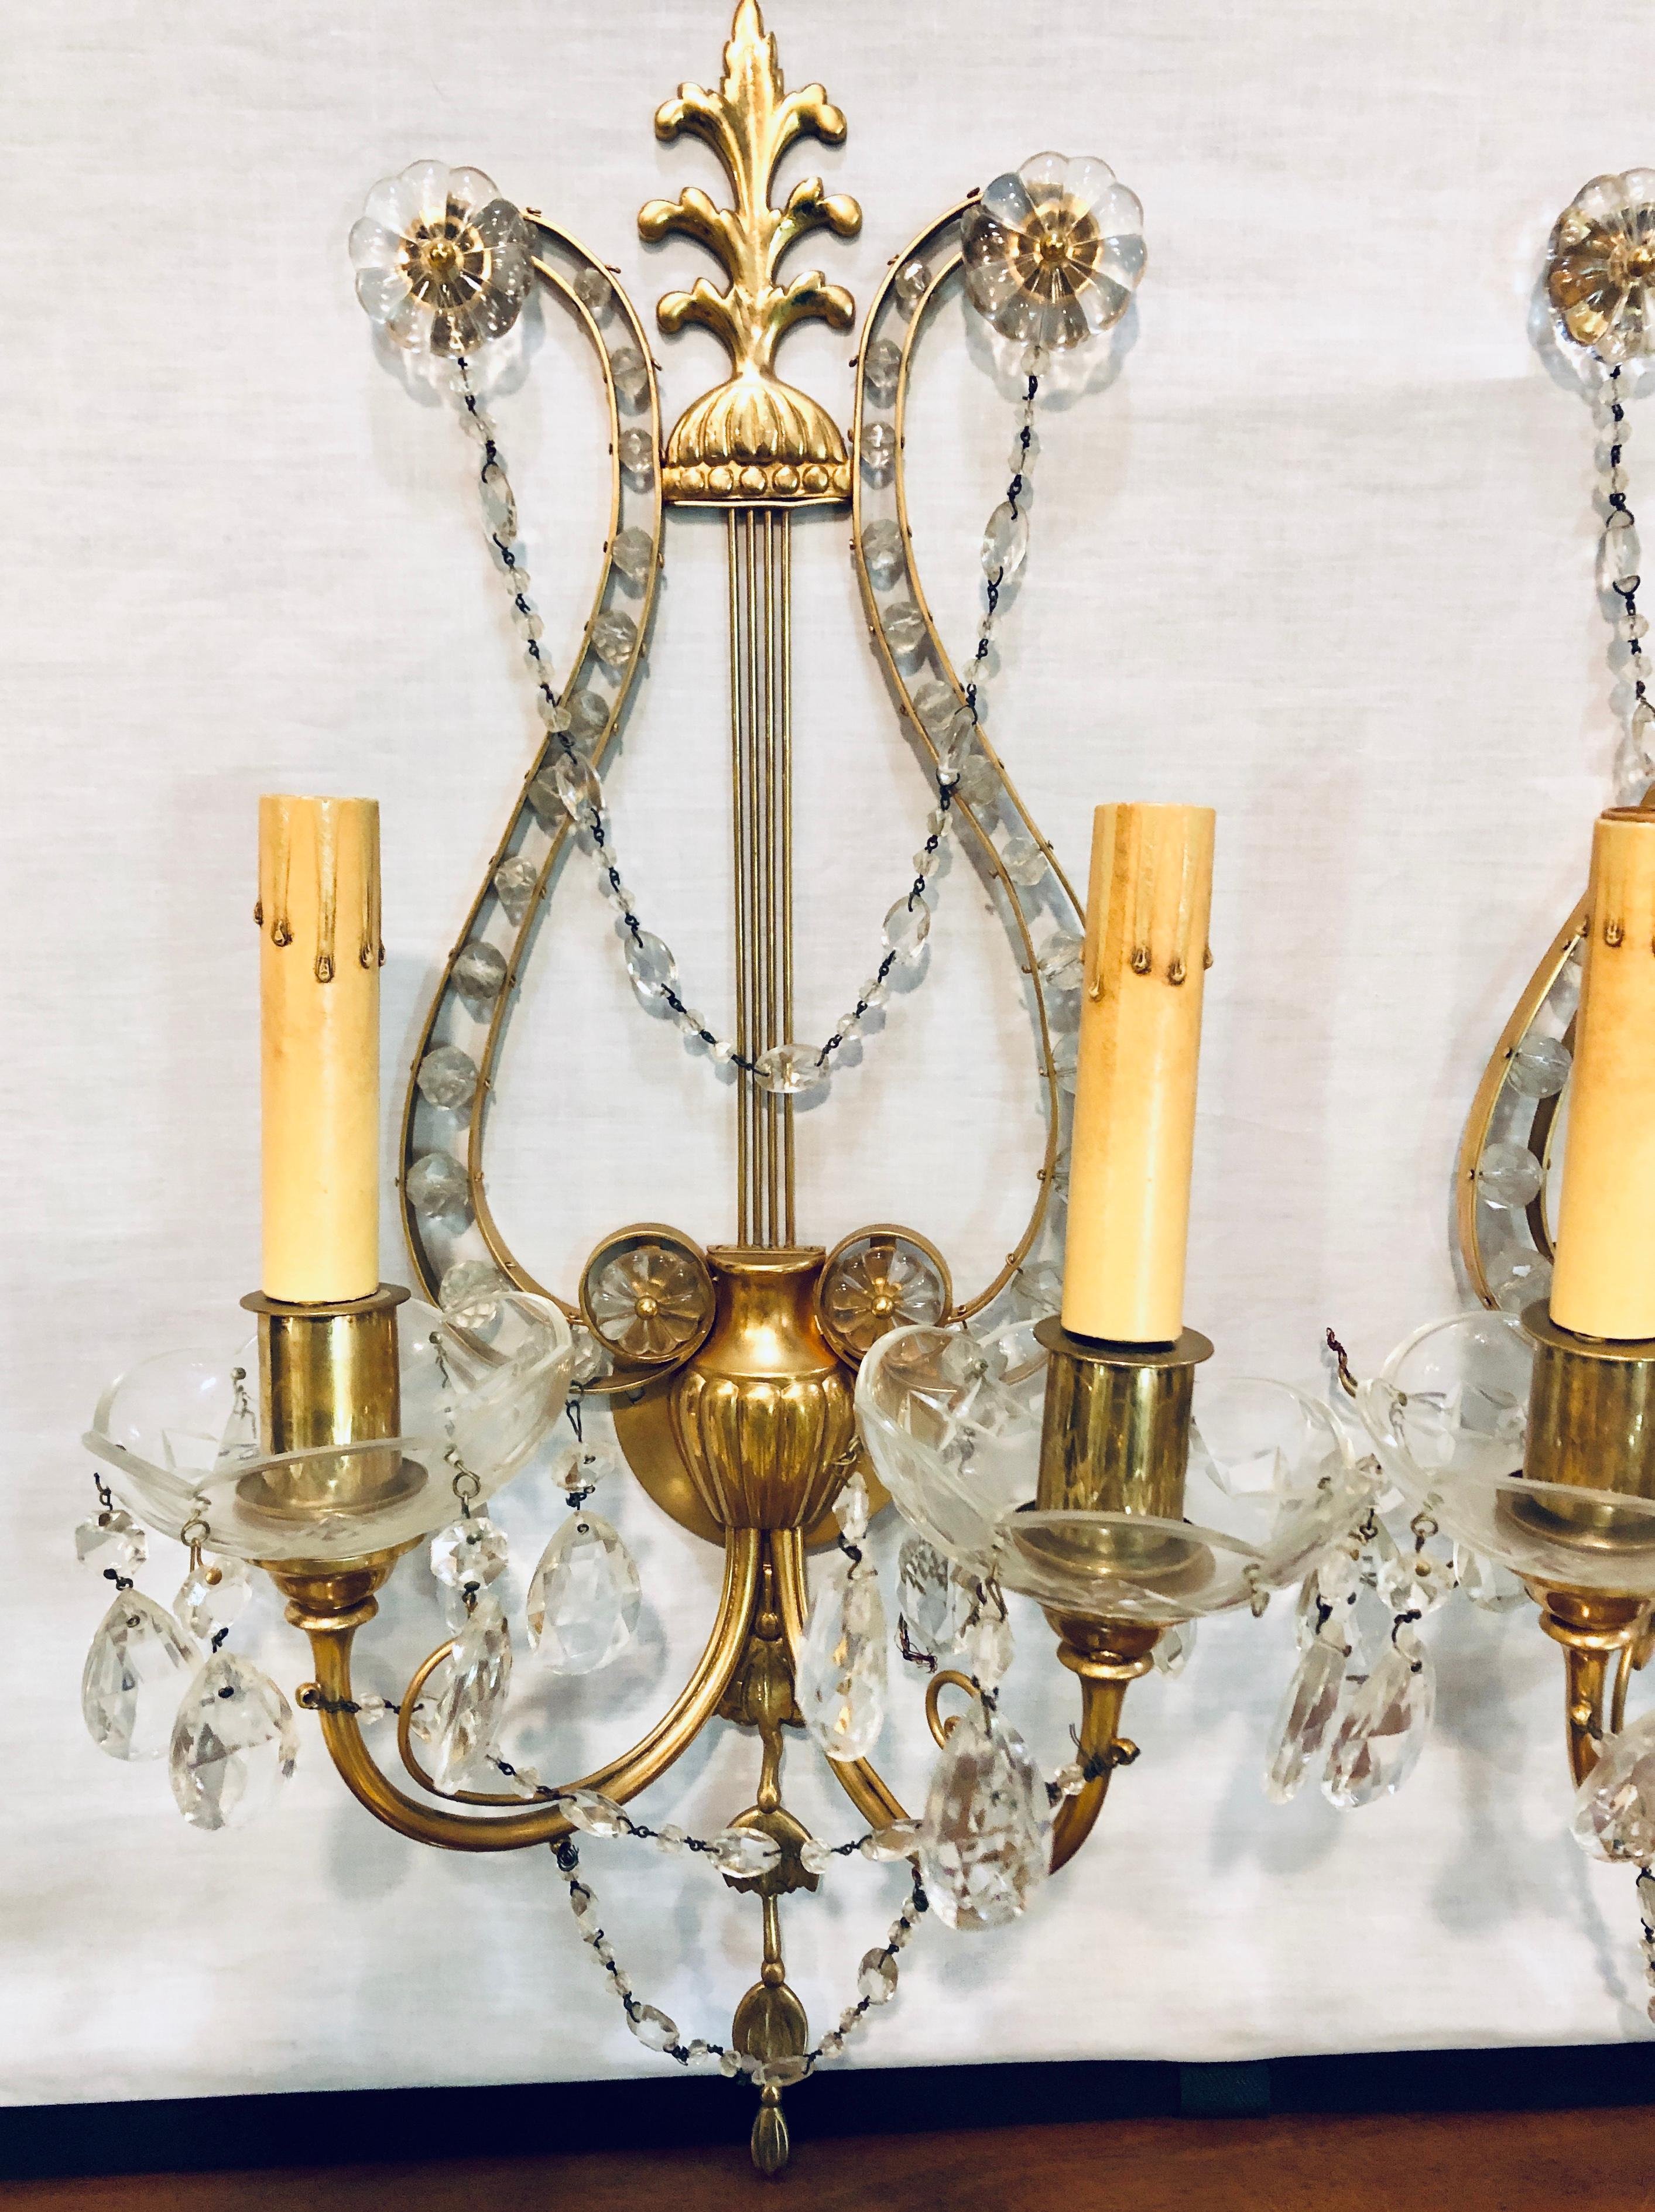 Pair of Bagues style lyre back crystal and brass 2-light wall sconces. These heavy finely cast bronze wall sconce have two lighted arms with flowing crystals and larger rosette crystals throughout. Direct from a Greenwich CT home.